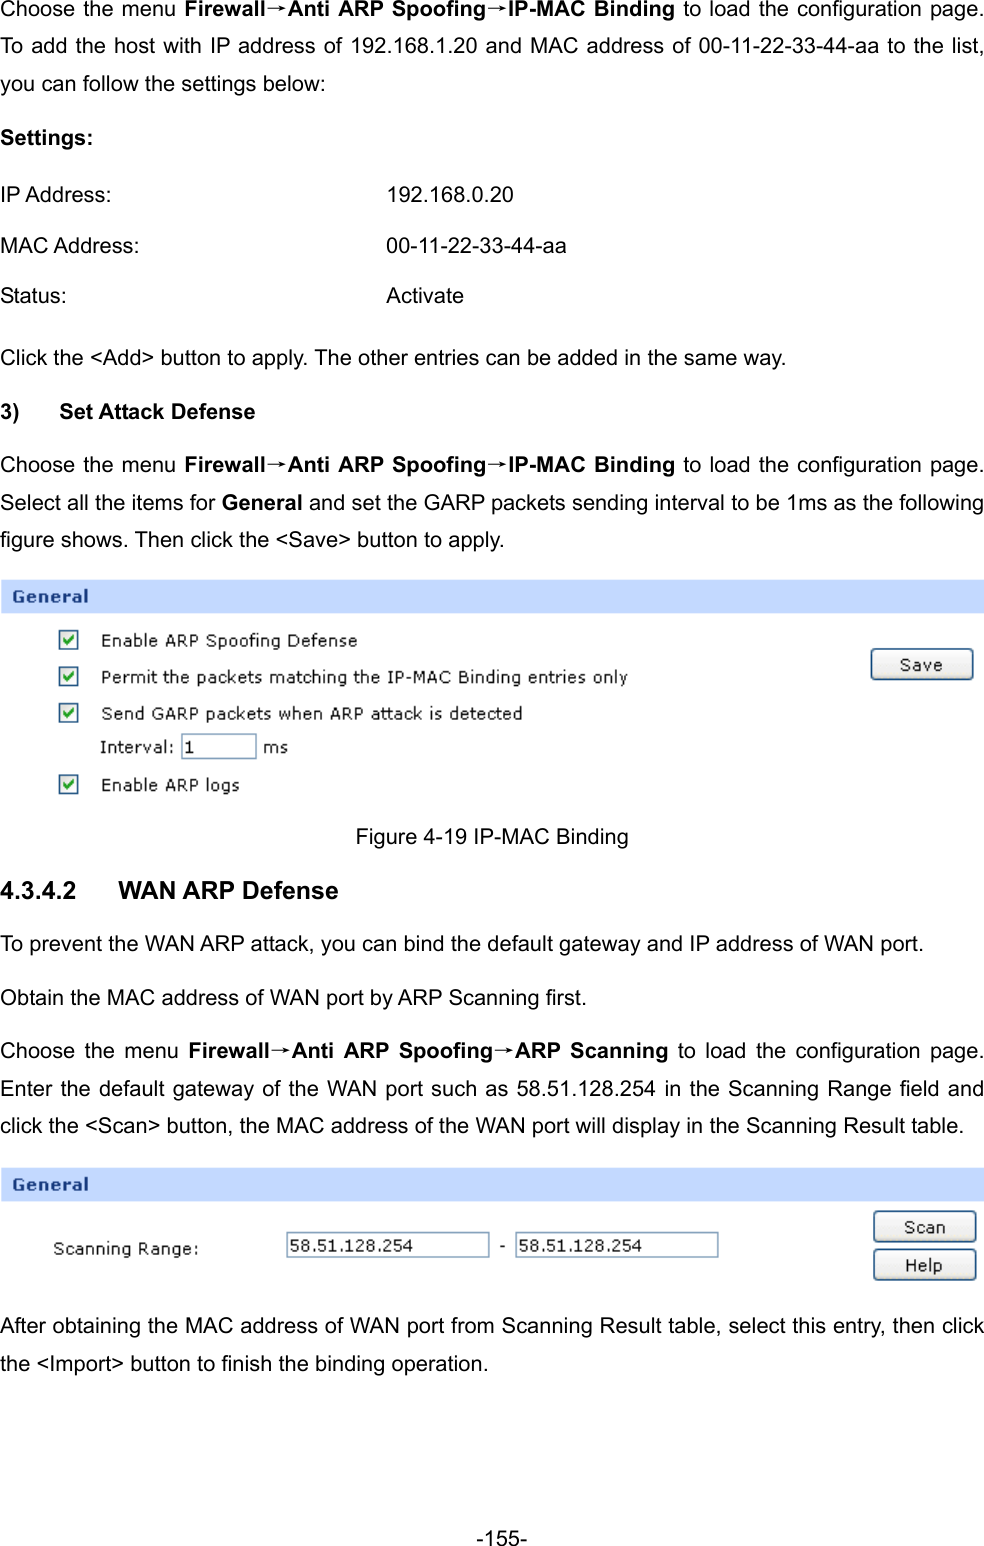  -155- Choose the menu Firewall→Anti ARP Spoofing→IP-MAC Binding to load the configuration page. To add the host with IP address of 192.168.1.20 and MAC address of 00-11-22-33-44-aa to the list, you can follow the settings below: Settings: IP Address:  192.168.0.20 MAC Address:  00-11-22-33-44-aa Status: Activate Click the &lt;Add&gt; button to apply. The other entries can be added in the same way.     3) Set Attack Defense Choose the menu Firewall→Anti ARP Spoofing→IP-MAC Binding to load the configuration page. Select all the items for General and set the GARP packets sending interval to be 1ms as the following figure shows. Then click the &lt;Save&gt; button to apply.  Figure 4-19 IP-MAC Binding 4.3.4.2  WAN ARP Defense To prevent the WAN ARP attack, you can bind the default gateway and IP address of WAN port. Obtain the MAC address of WAN port by ARP Scanning first. Choose the menu Firewall→Anti ARP Spoofing→ARP Scanning to load the configuration page. Enter the default gateway of the WAN port such as 58.51.128.254 in the Scanning Range field and click the &lt;Scan&gt; button, the MAC address of the WAN port will display in the Scanning Result table.    After obtaining the MAC address of WAN port from Scanning Result table, select this entry, then click the &lt;Import&gt; button to finish the binding operation. 